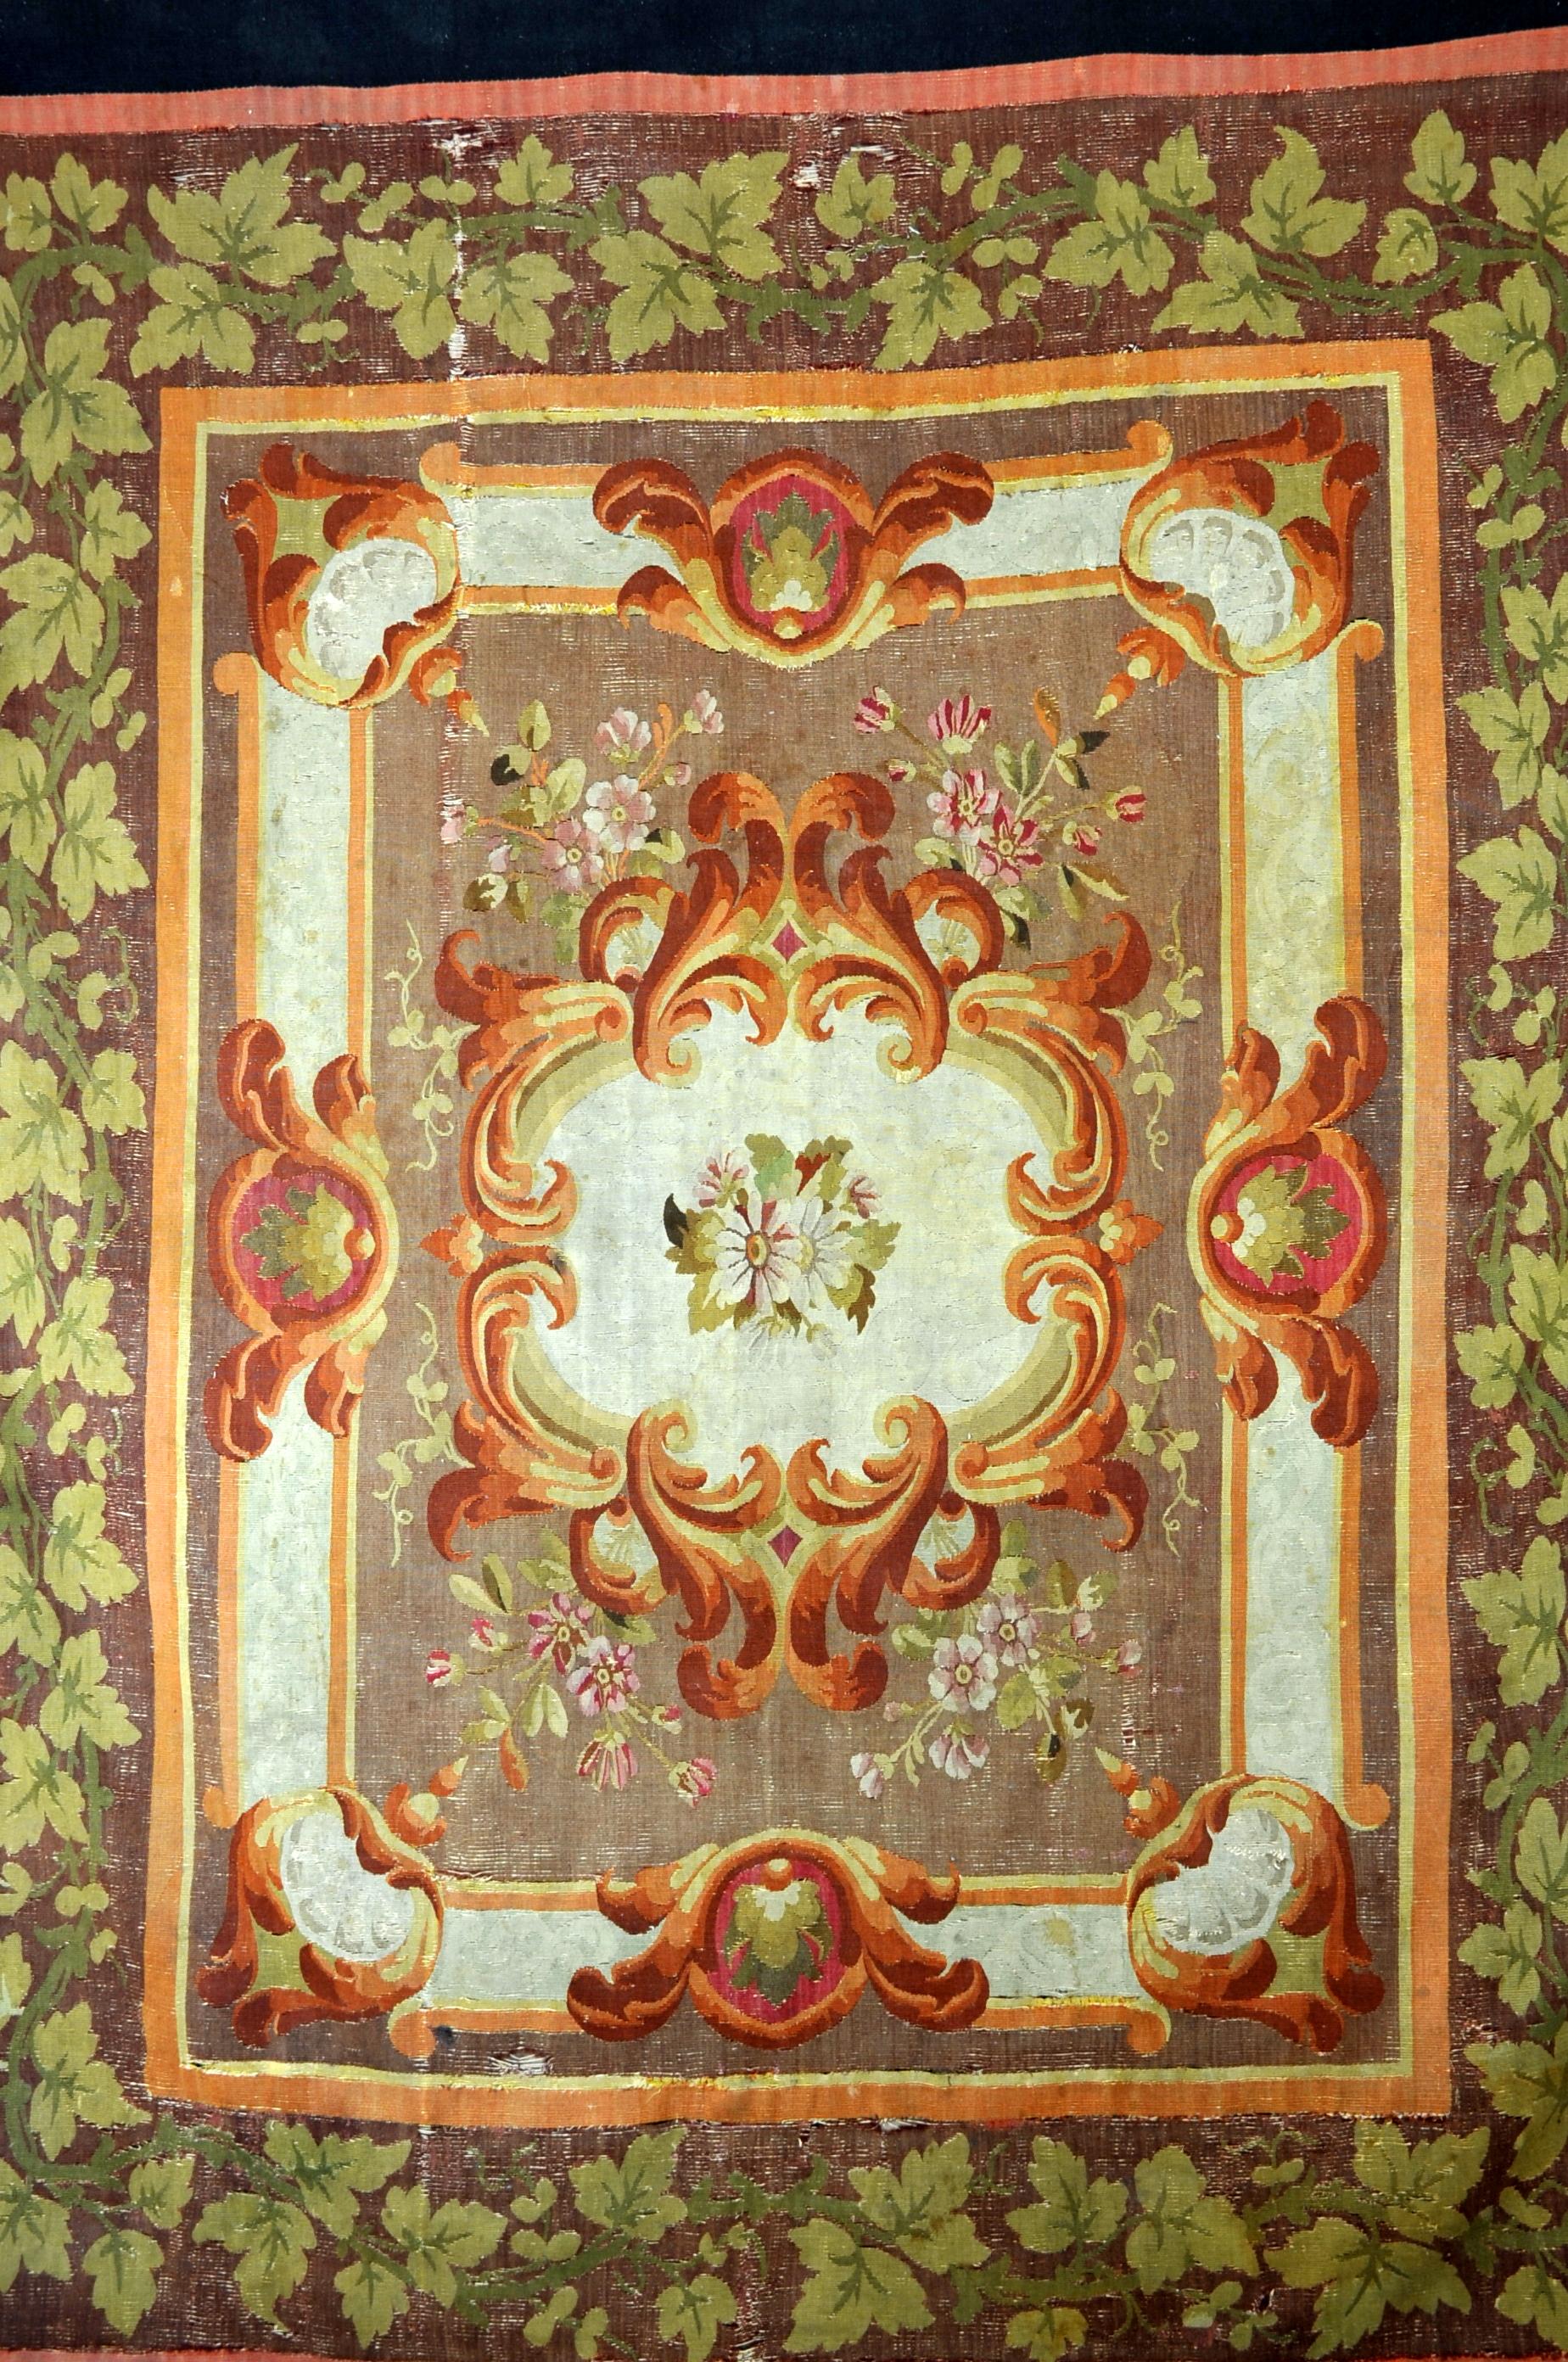 Aubusson rug from the Louis Philippe period with rich foliage decoration, floral and vegetal friezes in orange-brown and green tones.

Dark blue outer border.

Work from the Aubusson factory around 1830.

Good general condition, the colors are